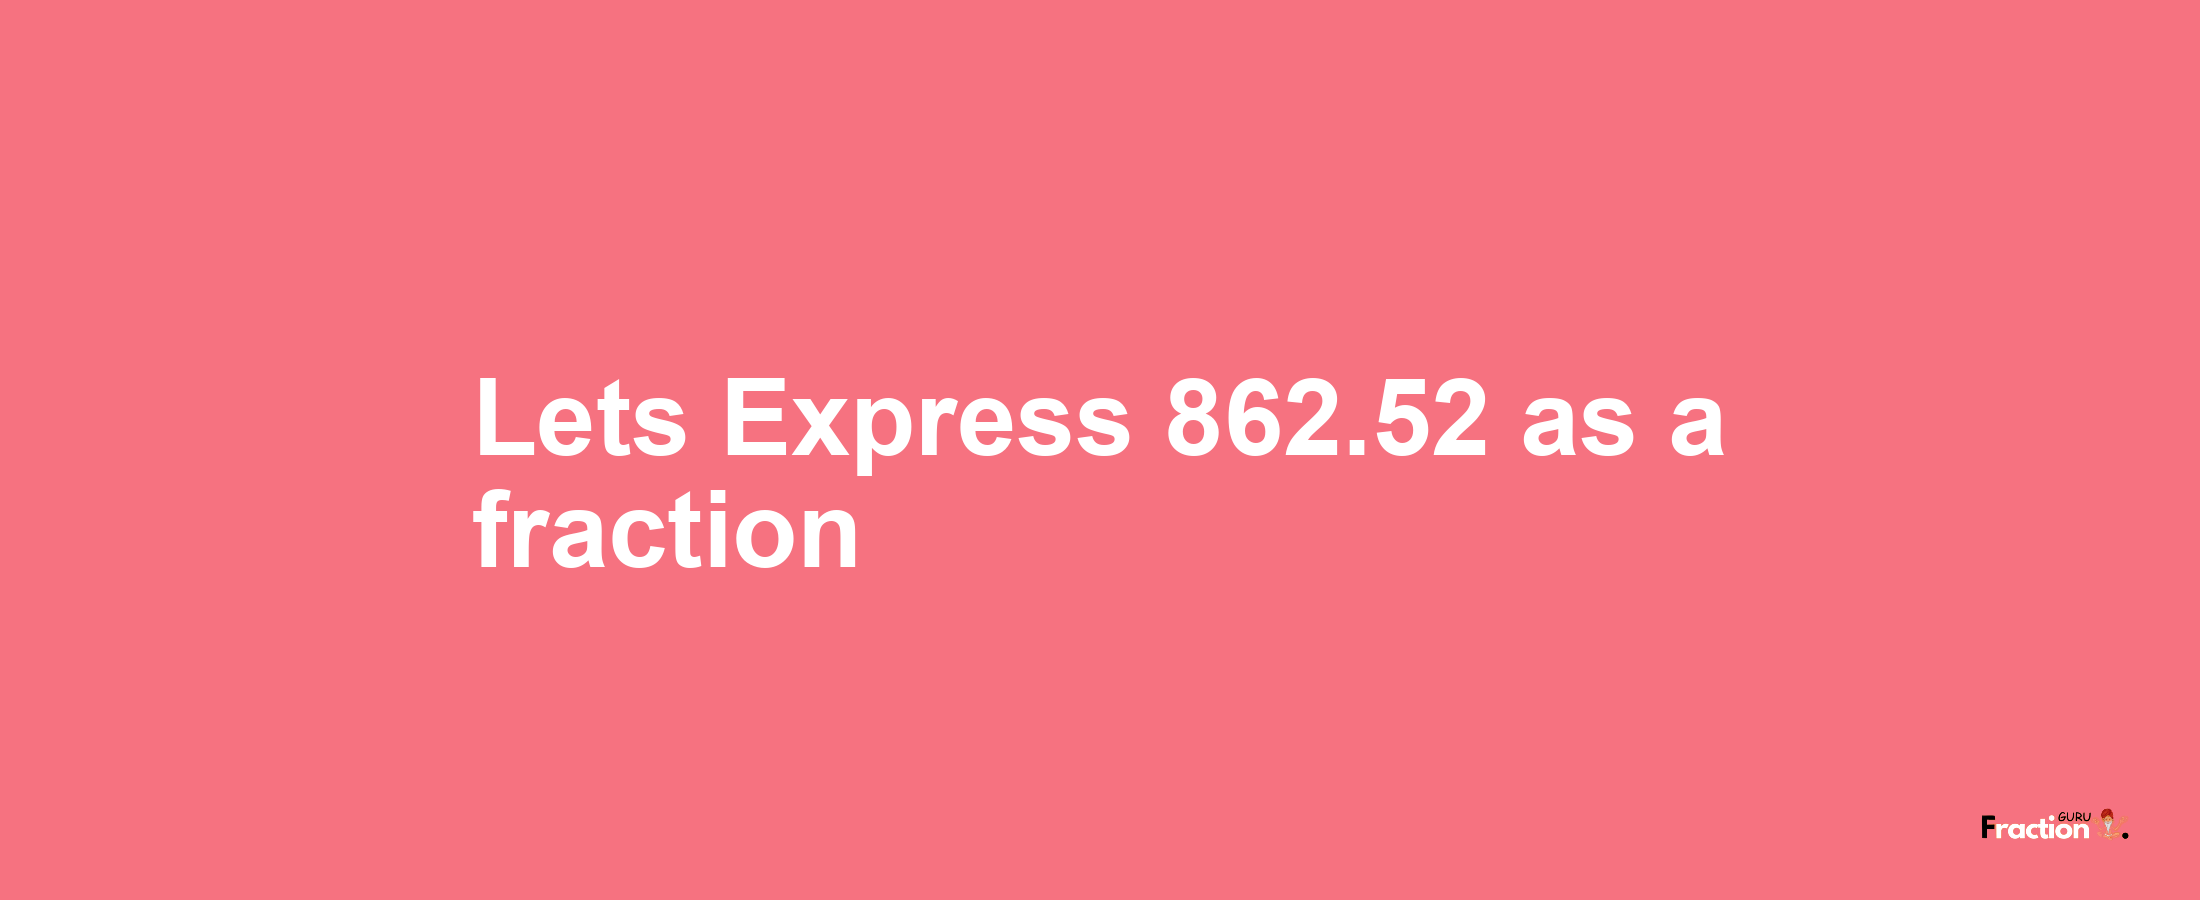 Lets Express 862.52 as afraction